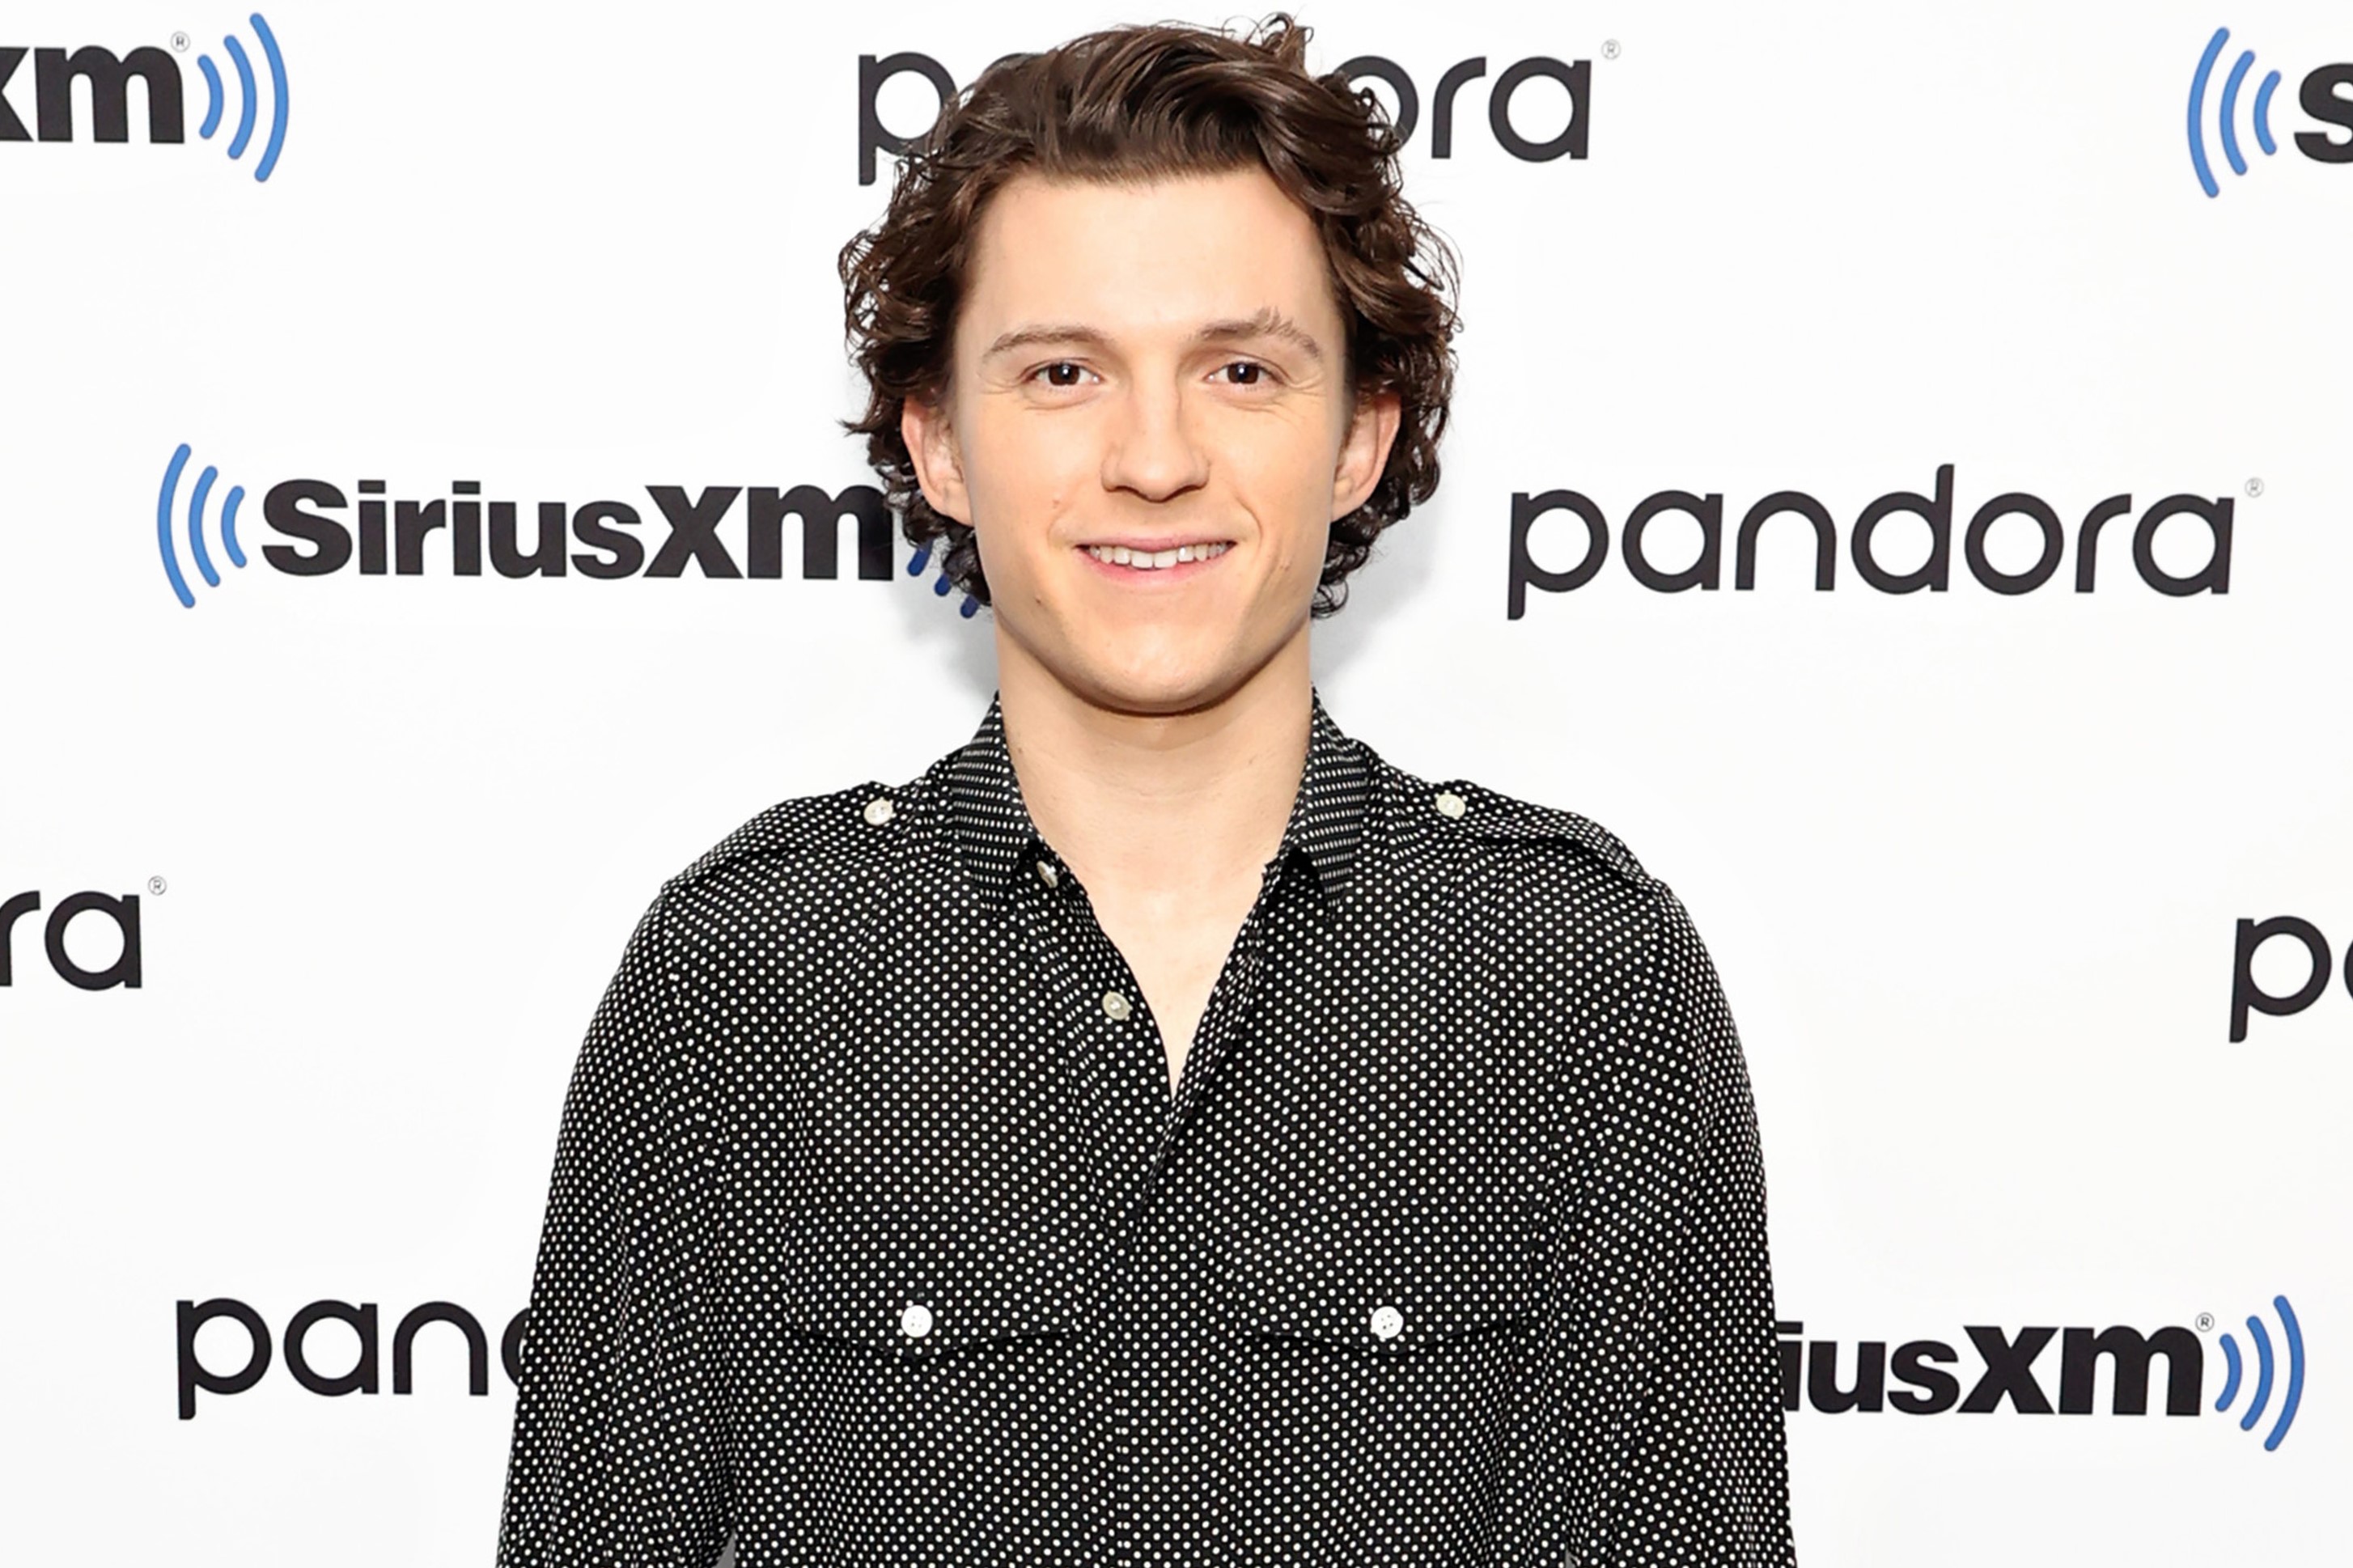 'Spider-Man: No Way Home' star Tom Holland wears a black button-up long-sleeved shirt with small white polka dots.